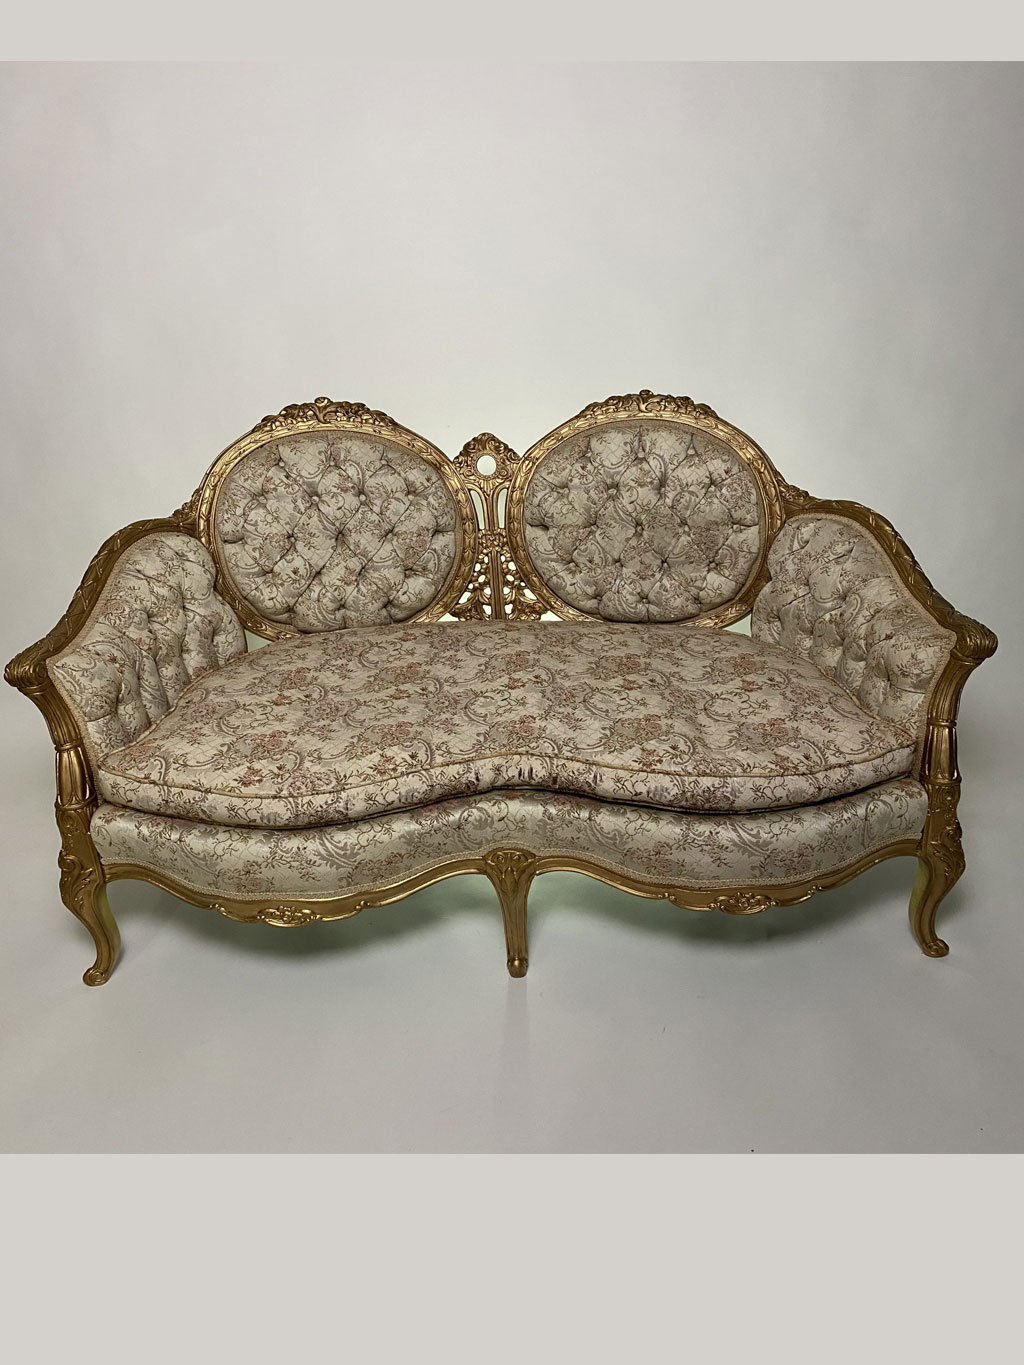 Antique Gold Trim Loveseat with Patterned Fabric